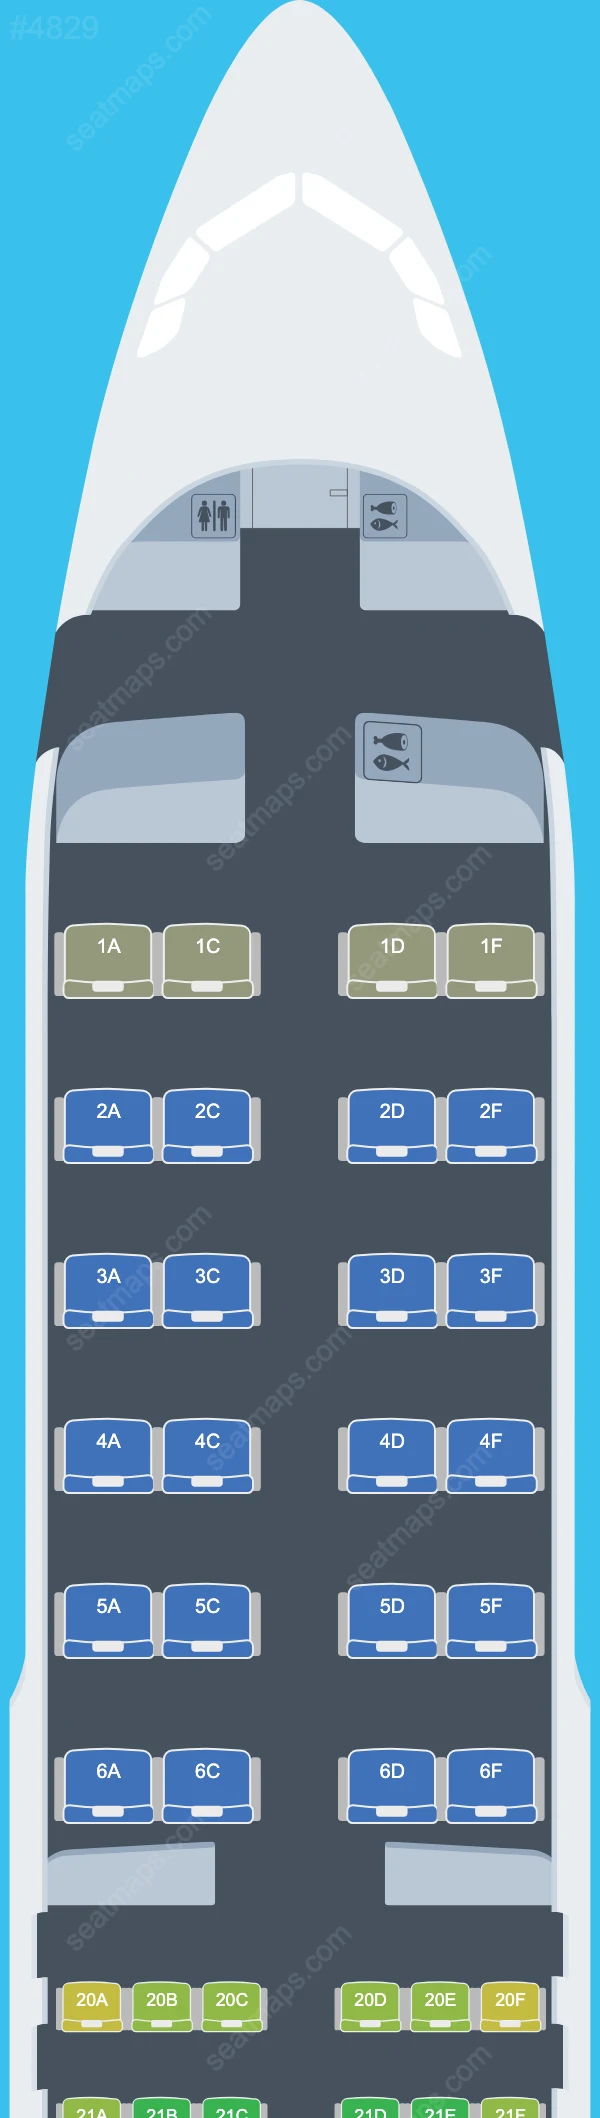 Middle East Airlines Airbus A320 Seat Maps A320-200